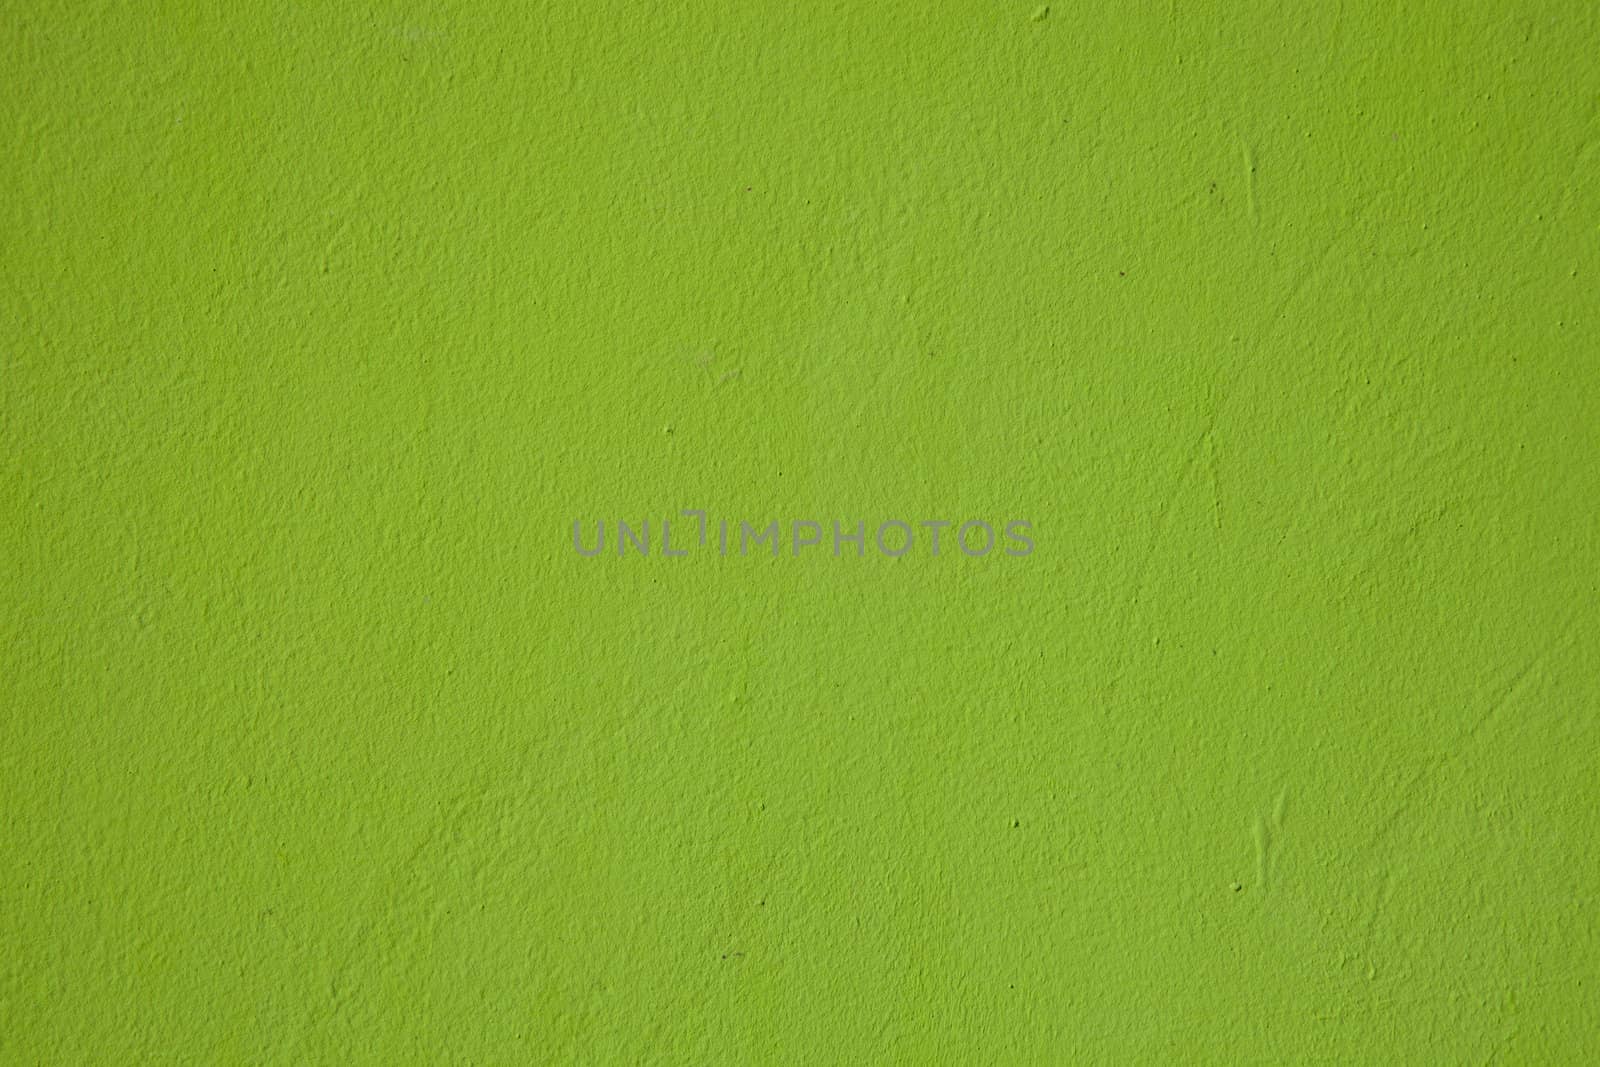 A light shade of lime green paint on a rendered surface.